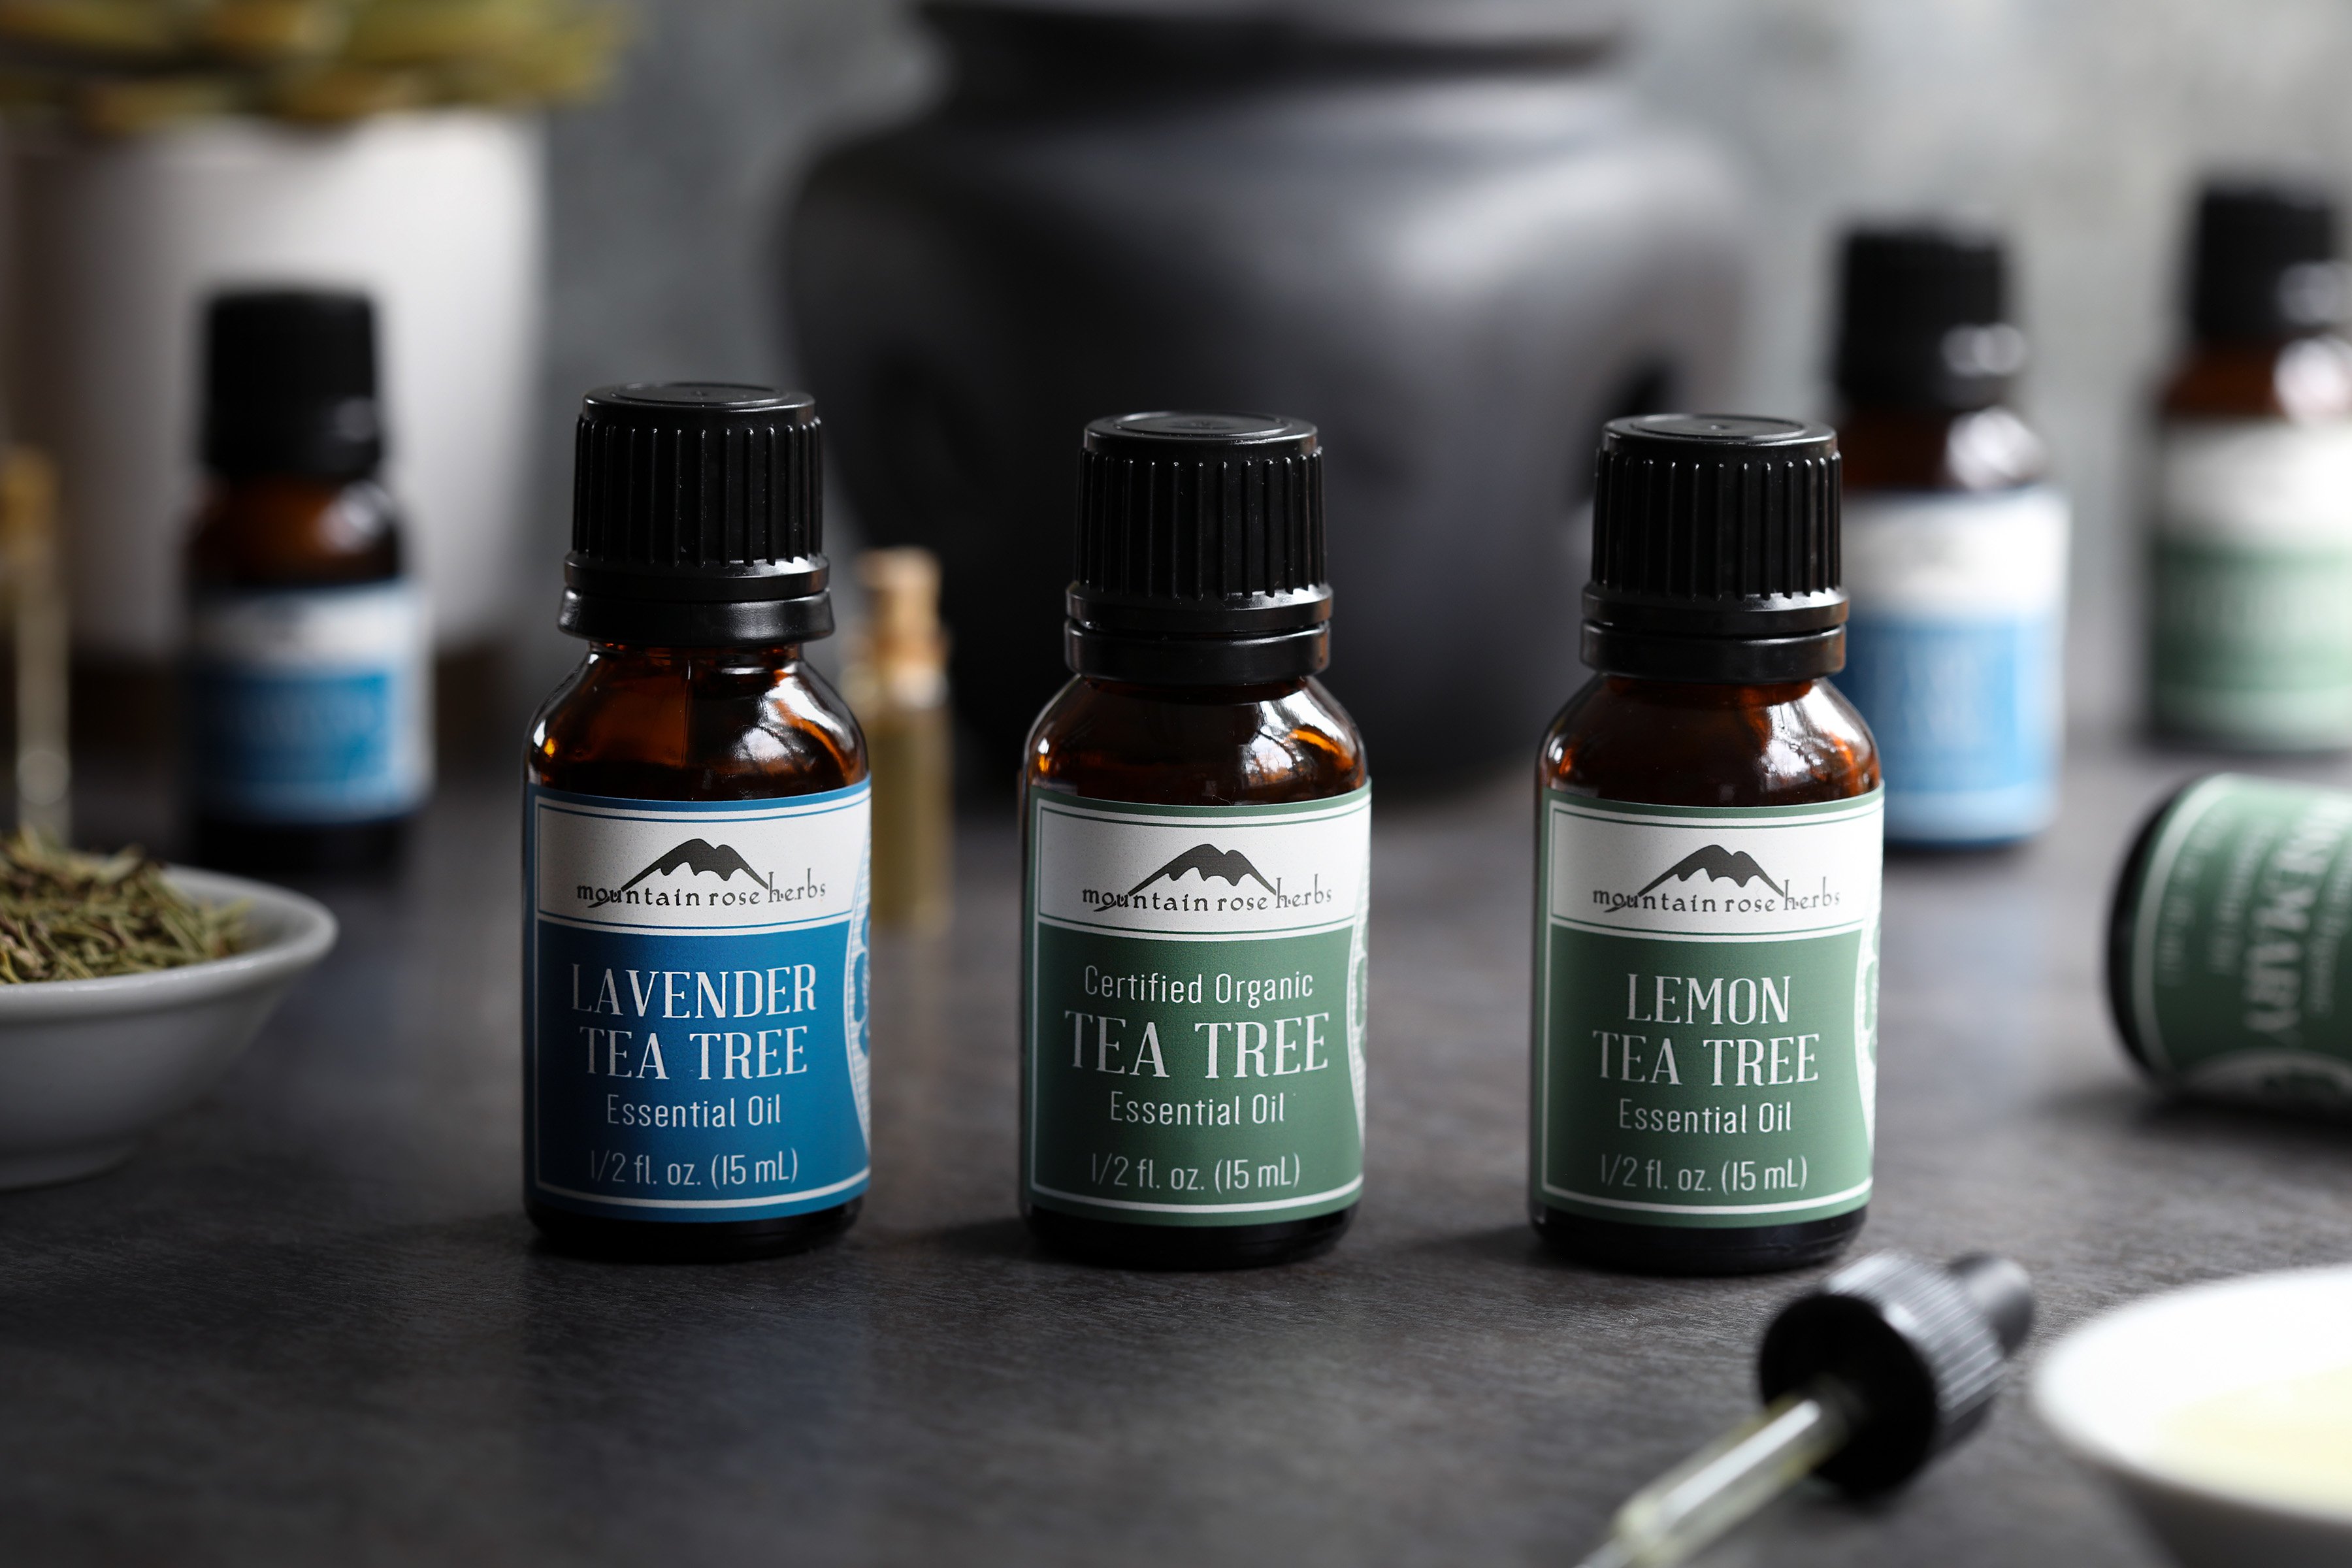 Organic tea tree essential oils include tea tree essential oil, lavender tea tree essential oil, and lemon tea tree essential oil. Packed in amber glass bottles with brightly colored labeling. 